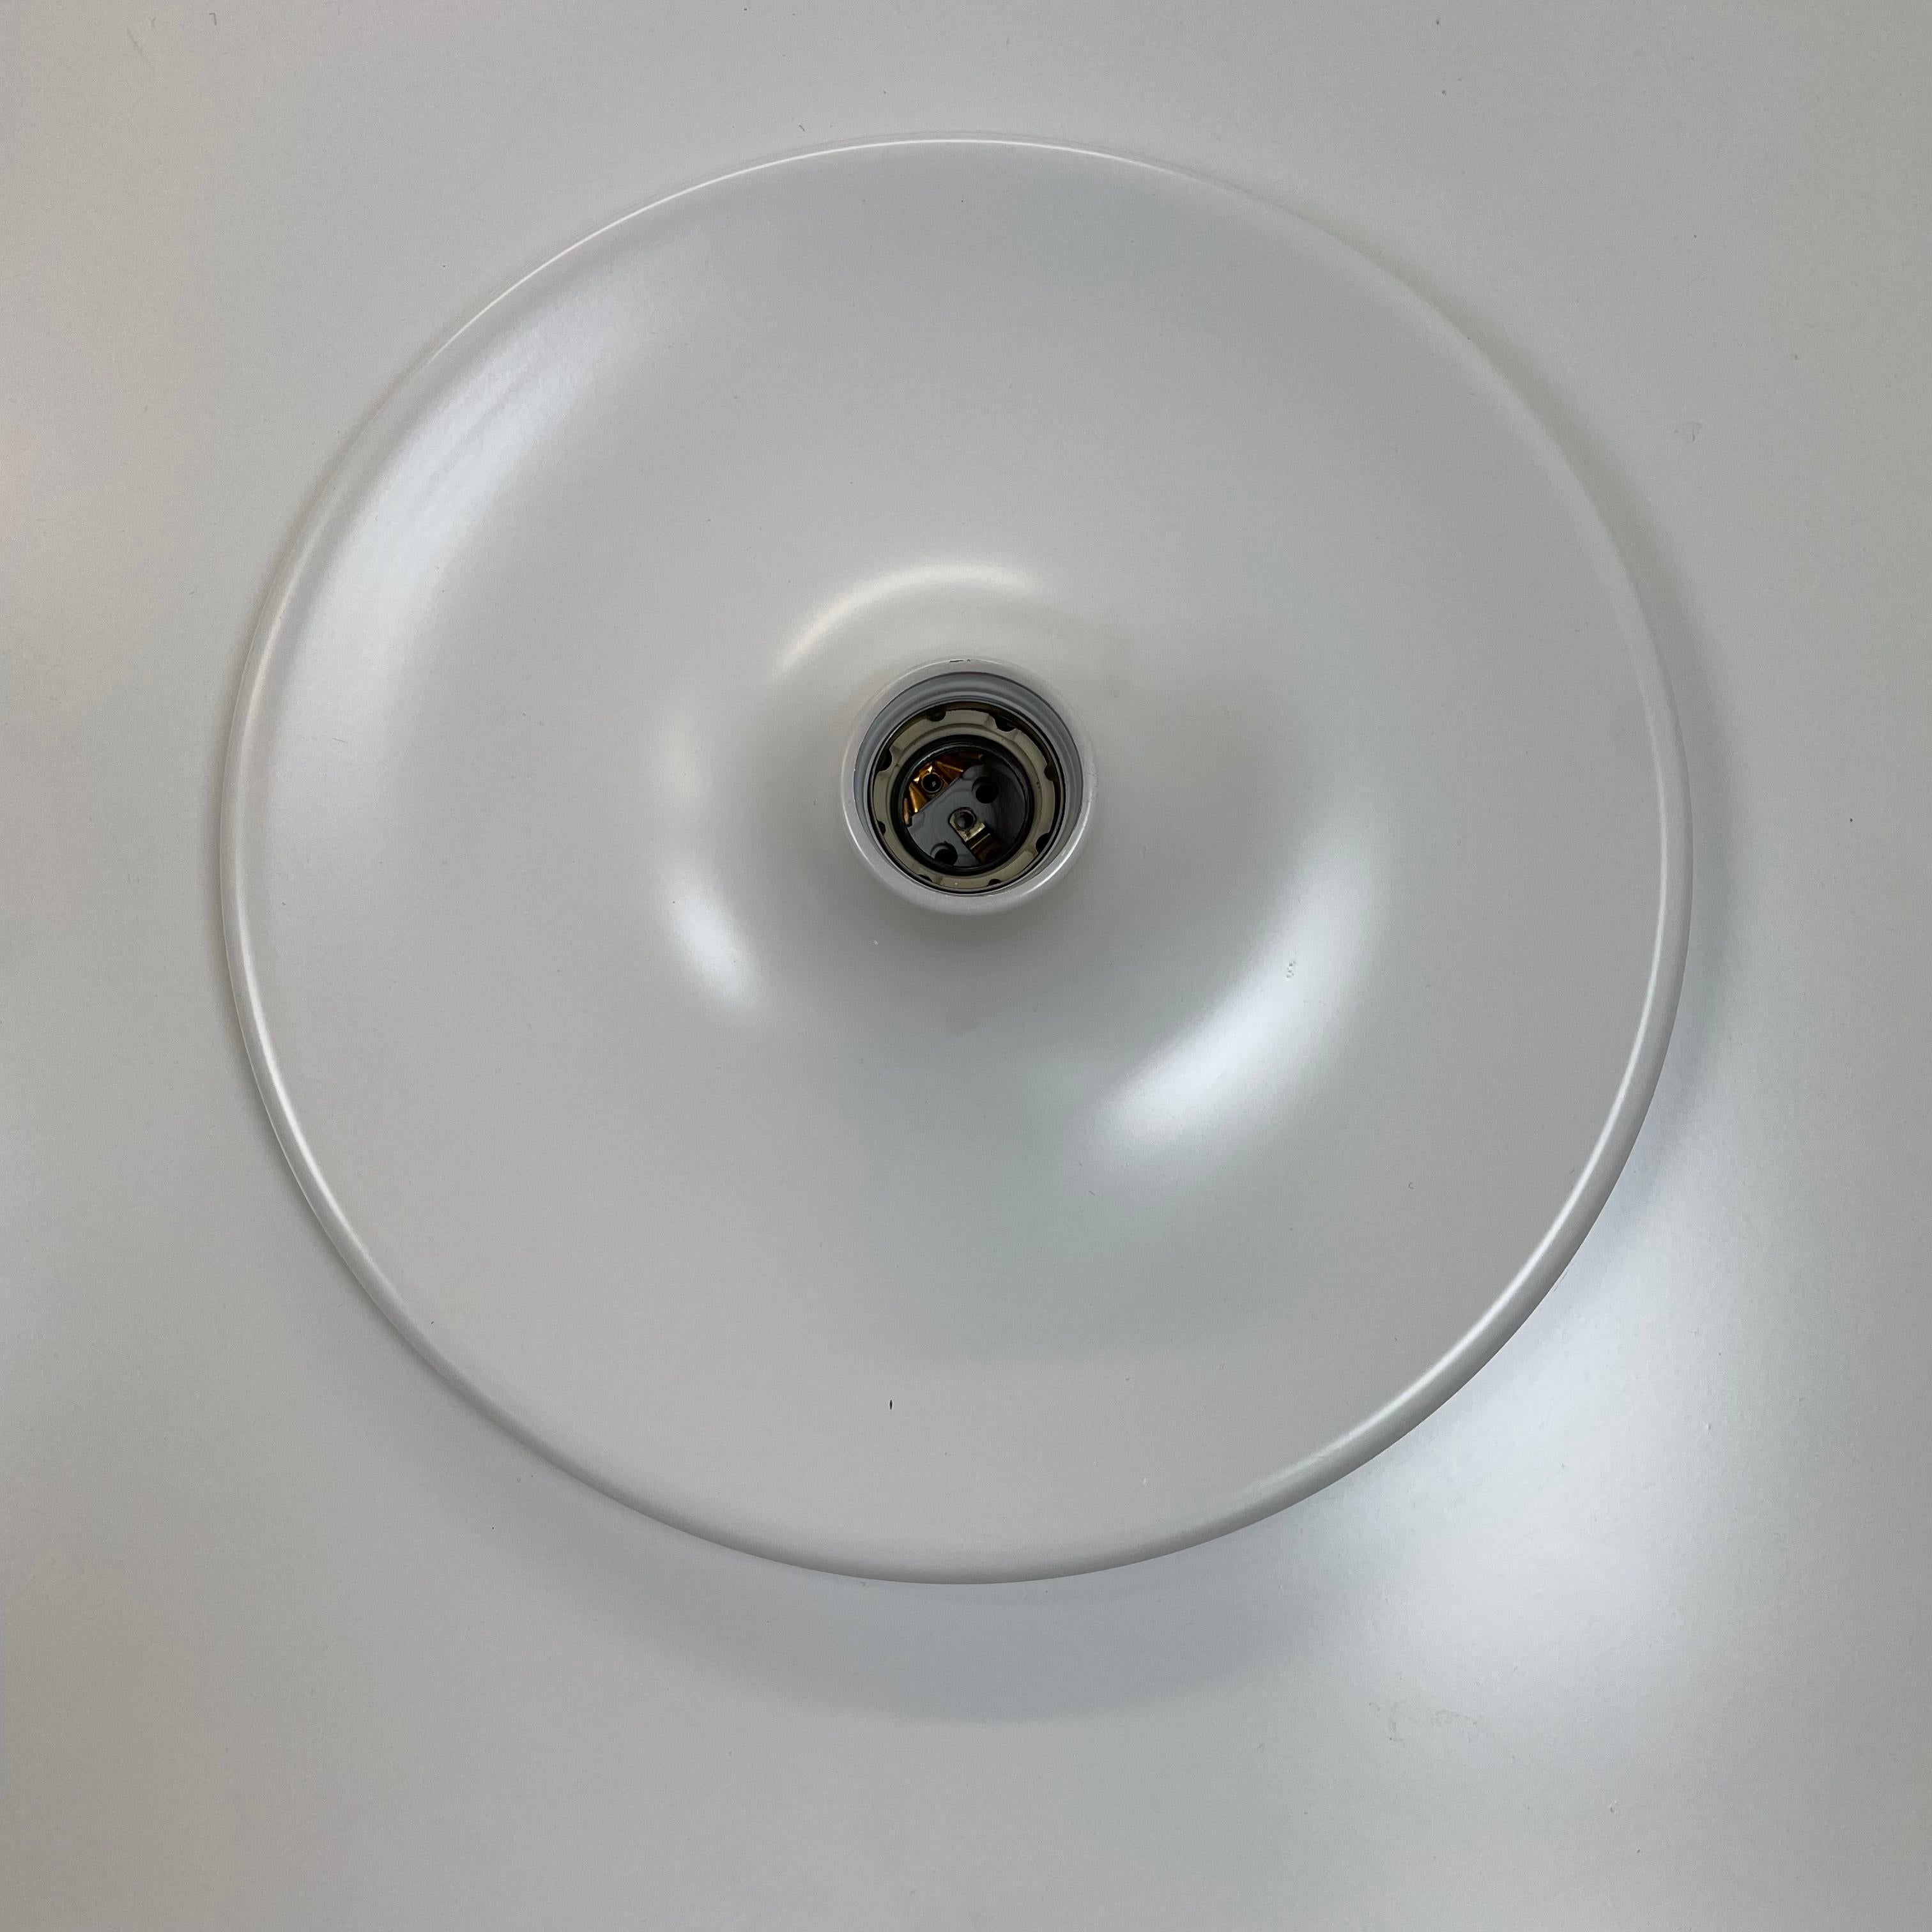 Rare White Xxl Wall Light Panel Element, Germany 1980s For Sale 2